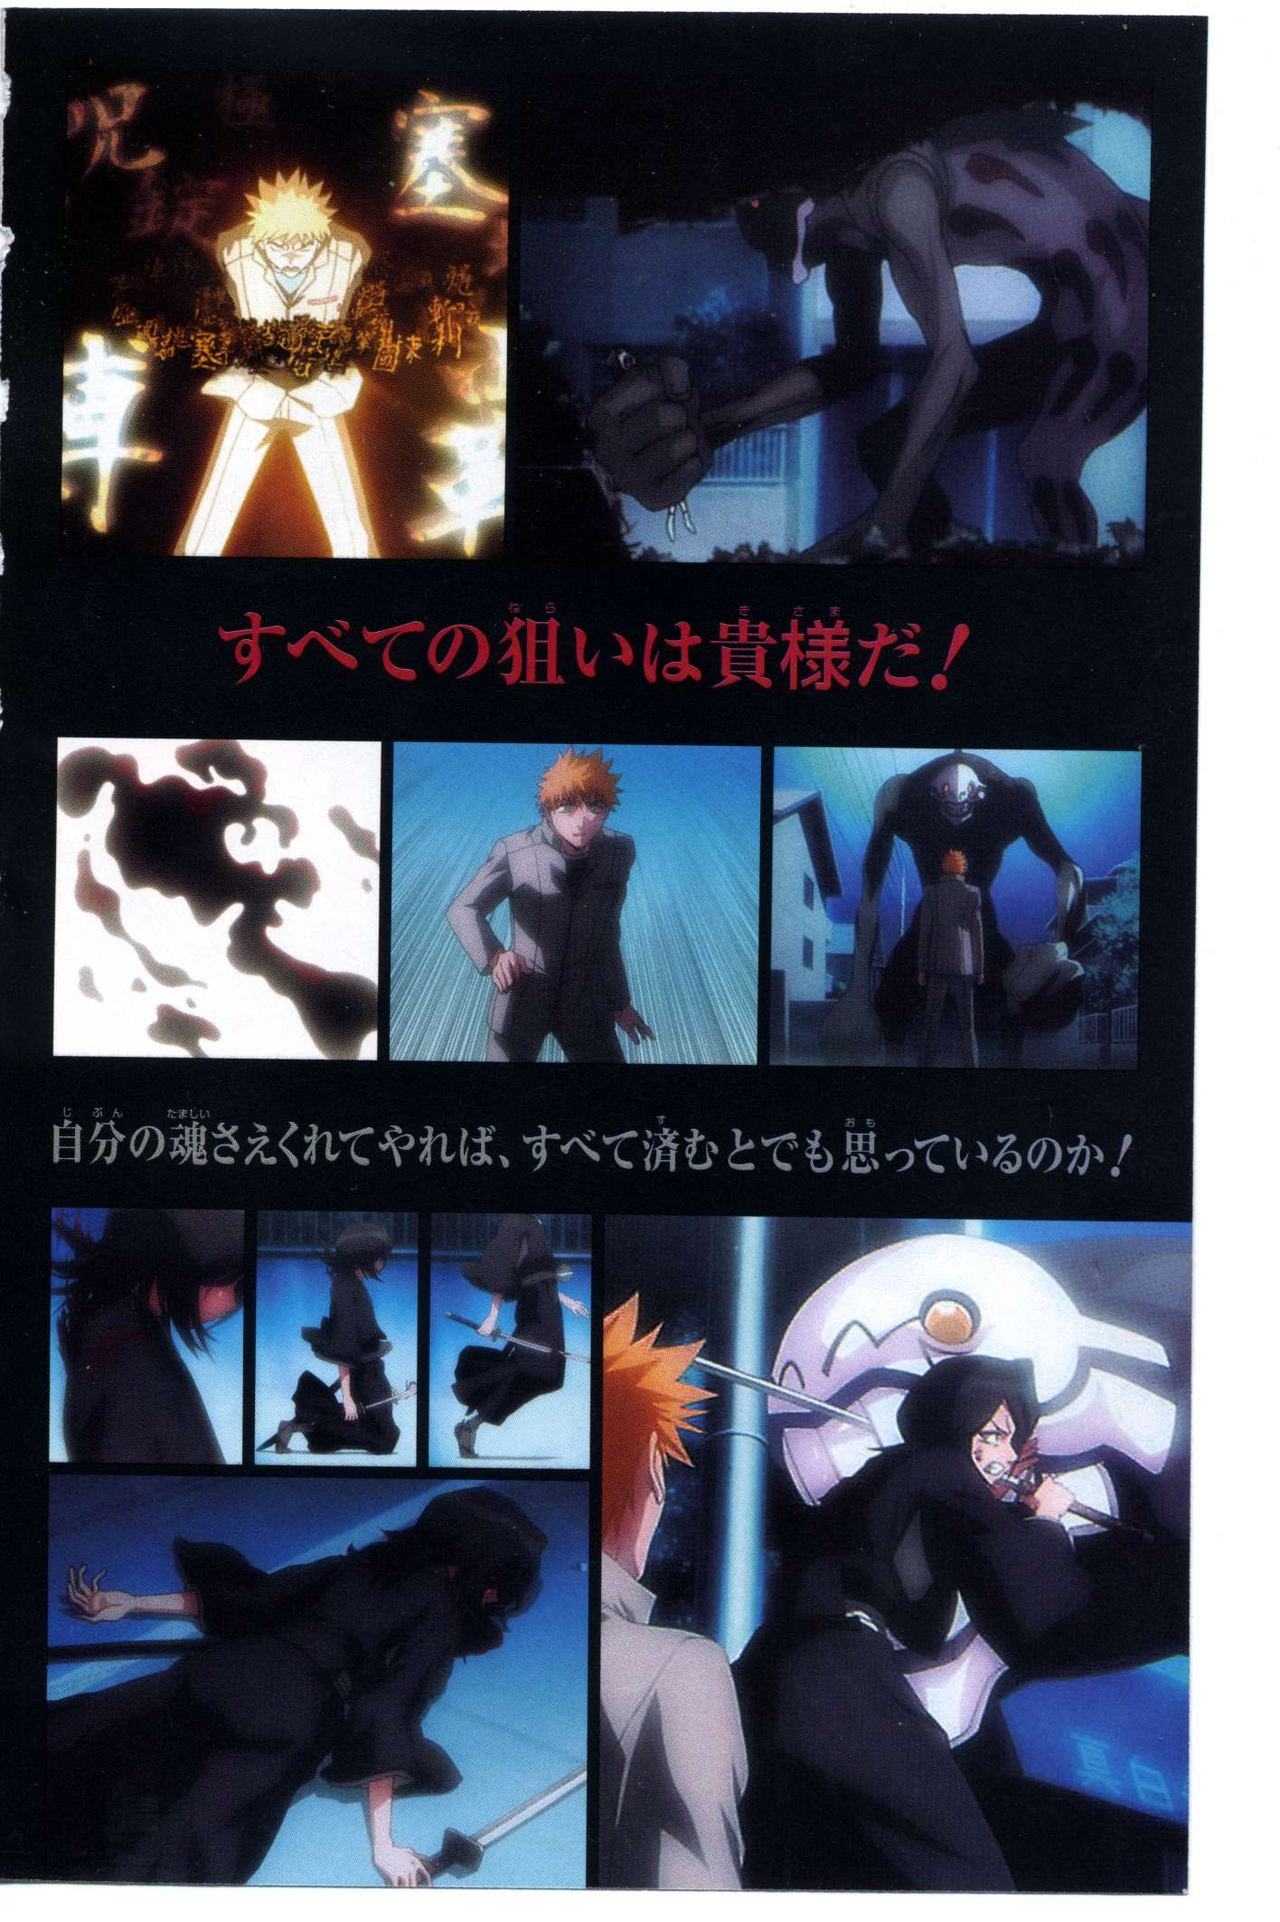 Bleach: Official Animation Book VIBEs 12